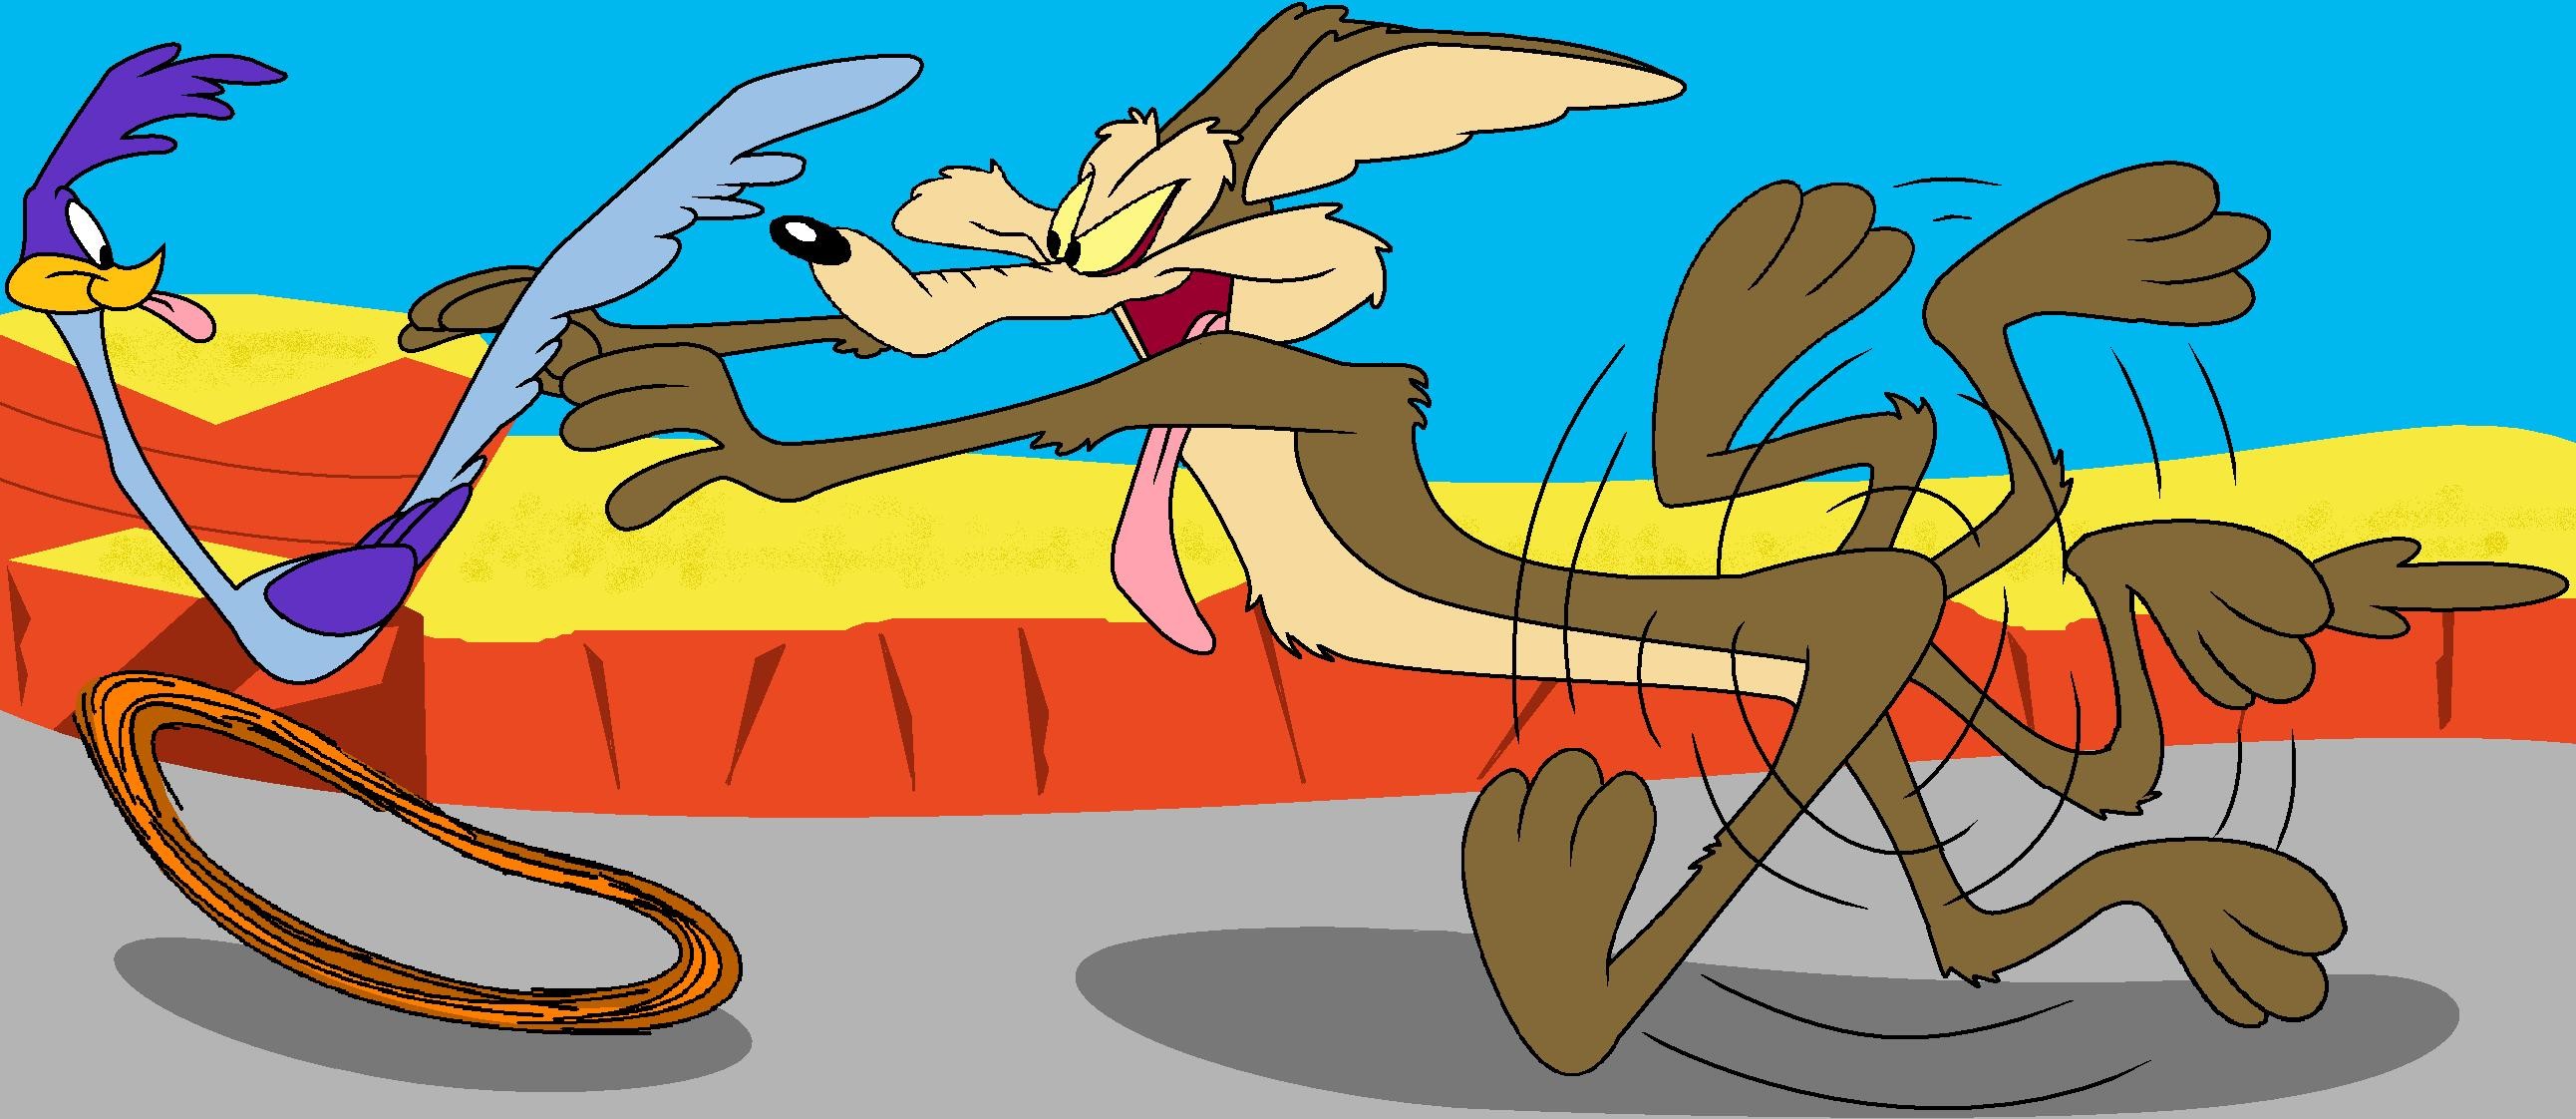 2584x1122 Wile E. Coyote and The Road Runner Wallpaper 7 - 2584 X 1122